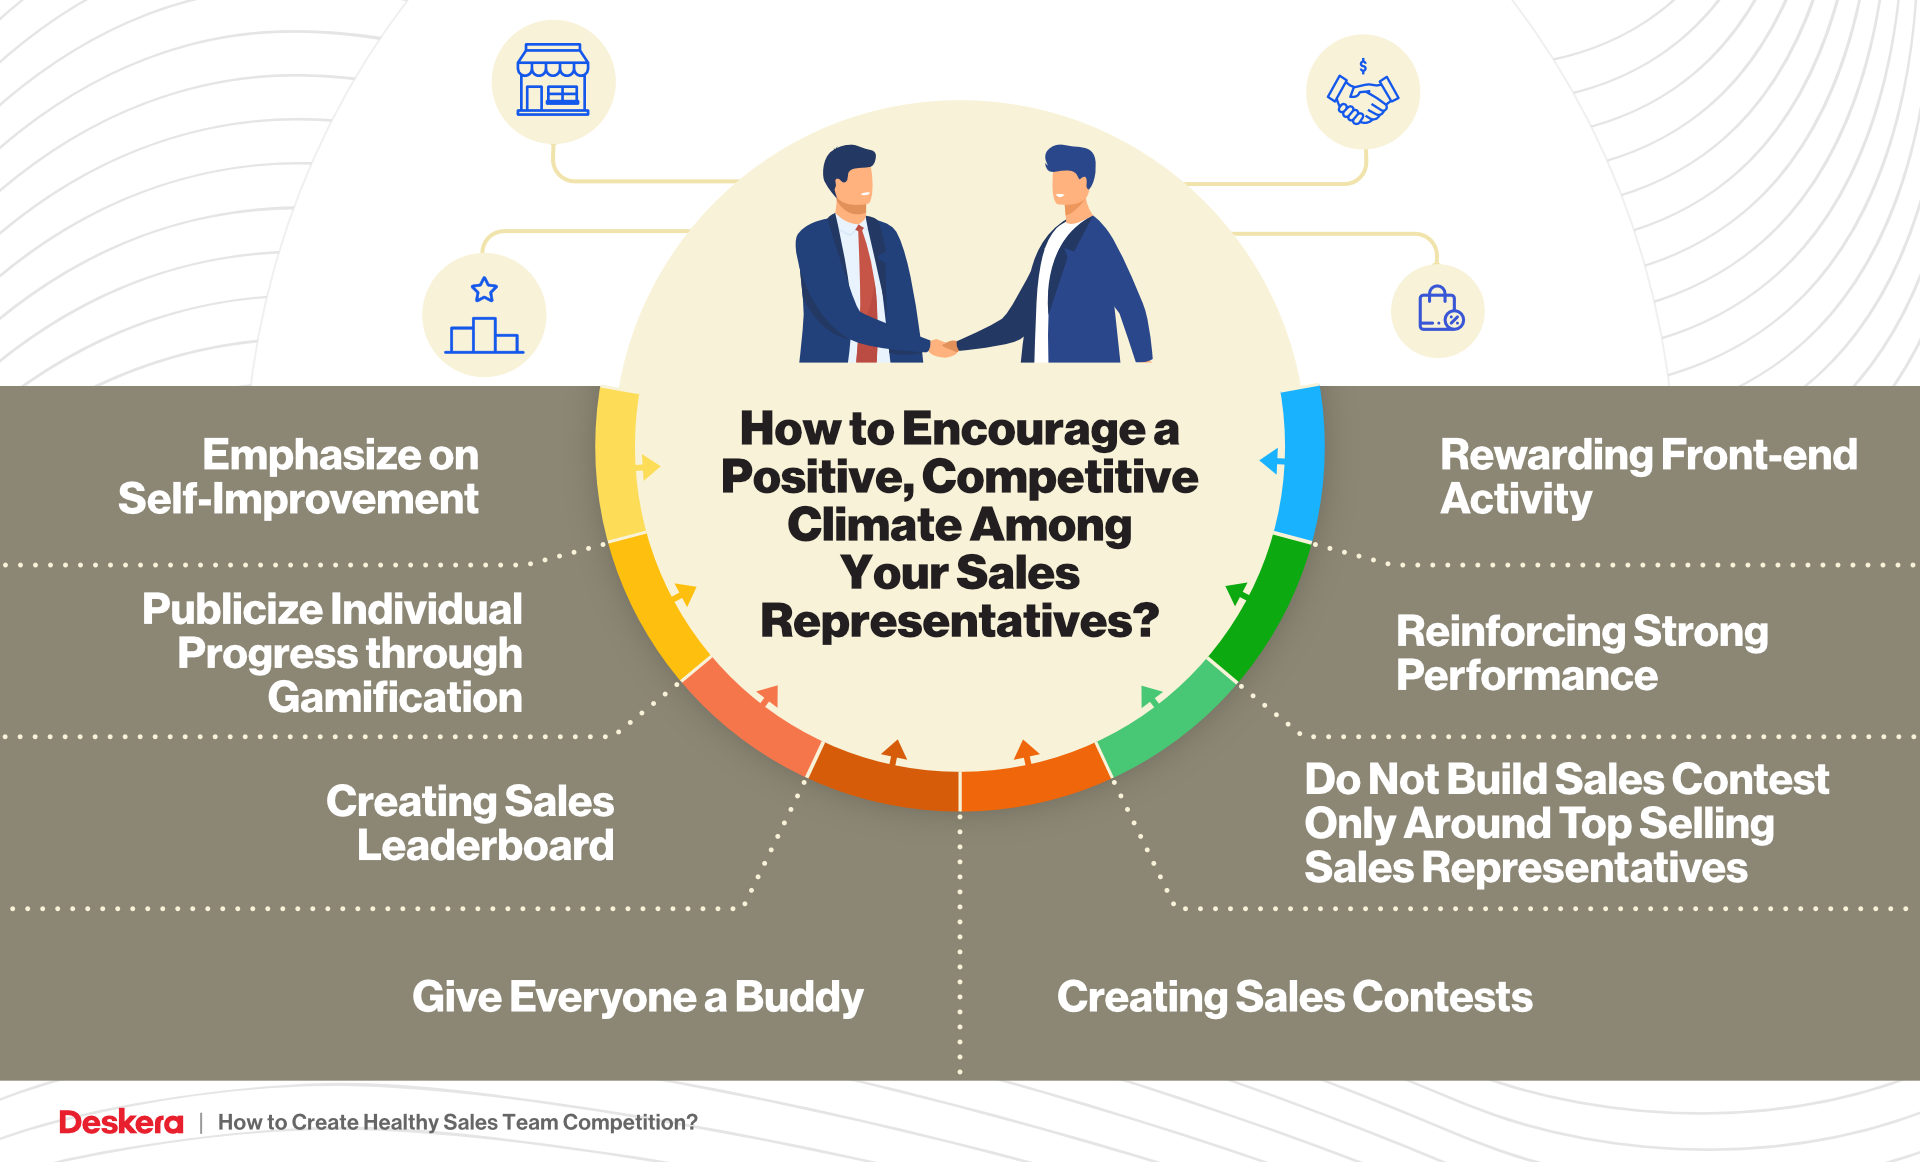 How to Encourage a Positive, Competitive Climate Among Your Sales Representatives?